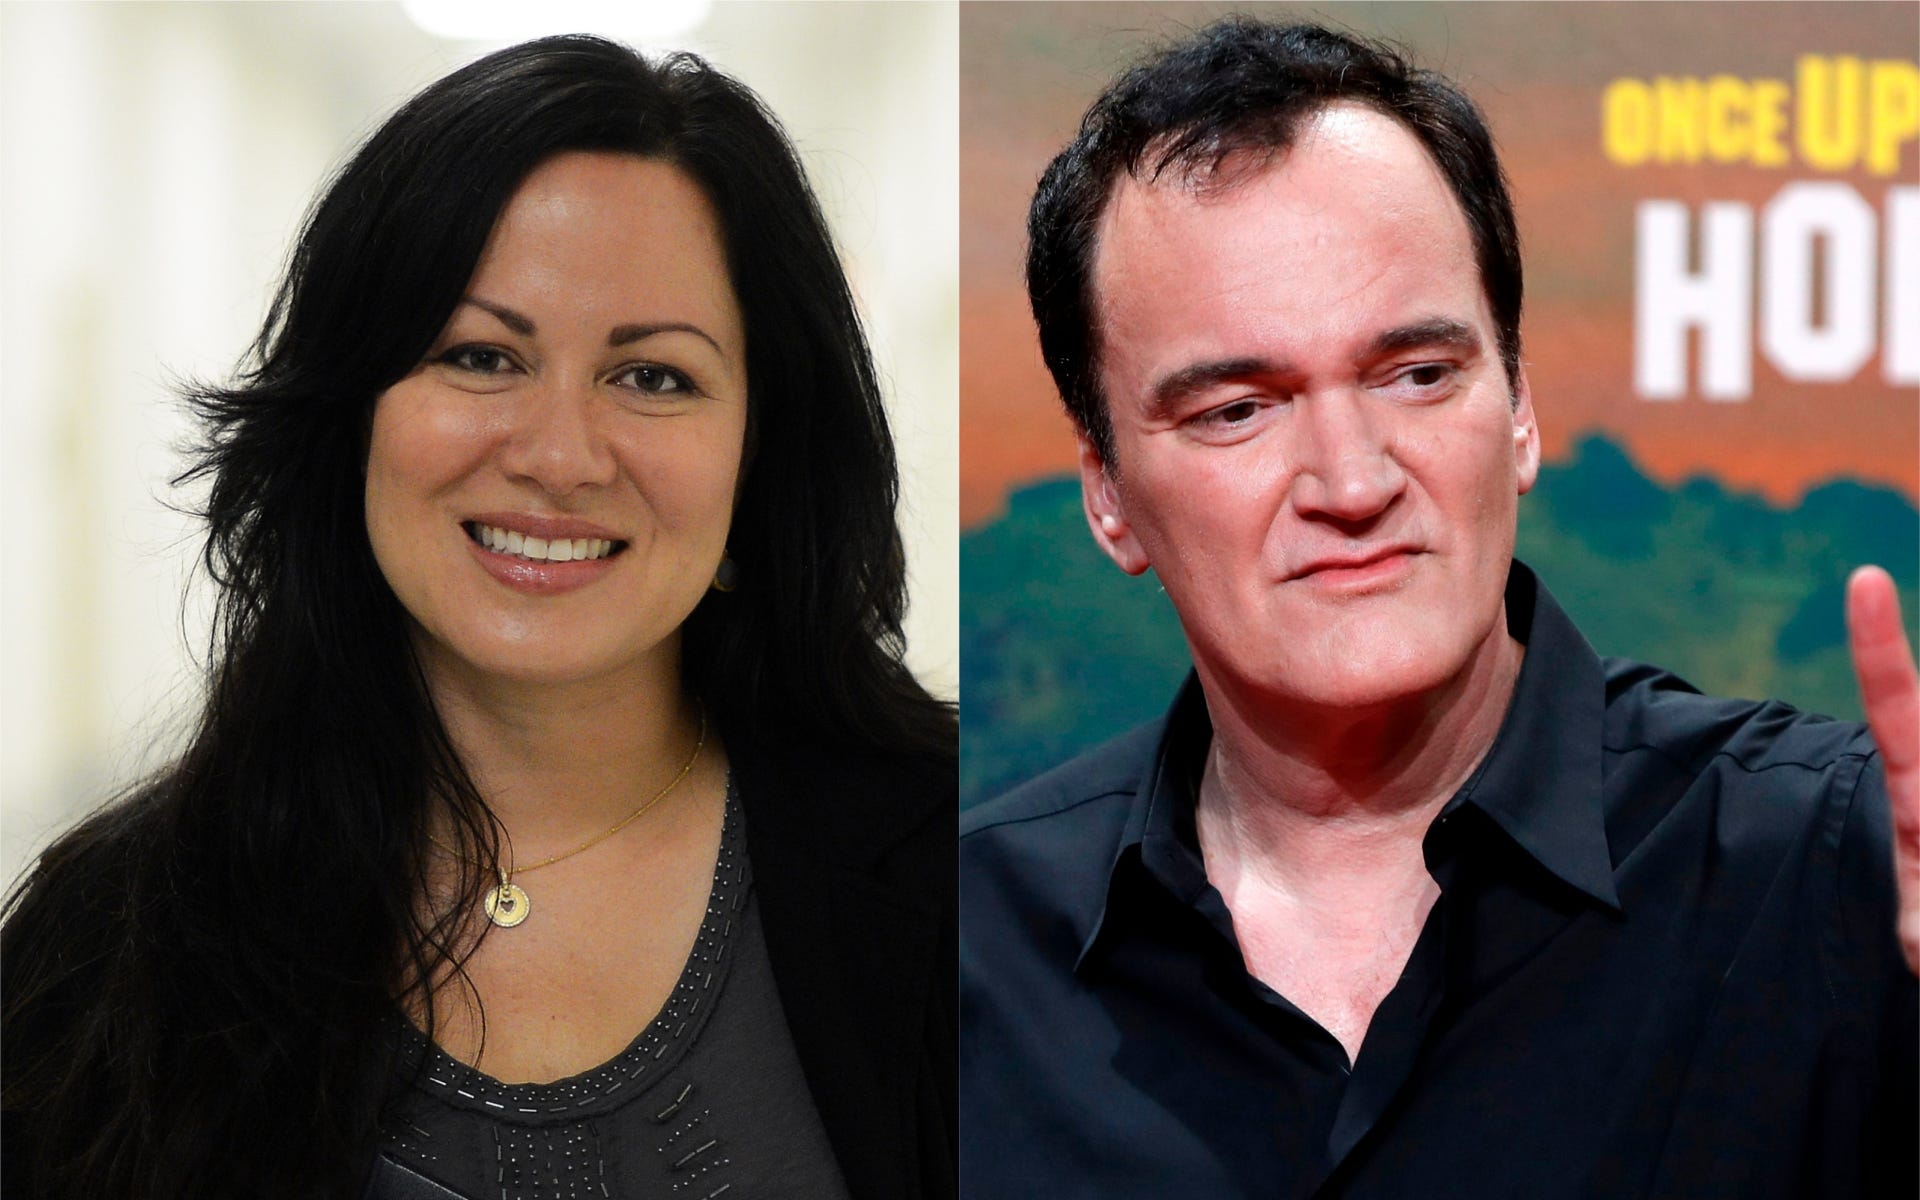 Bruce Lee's daughter Shannon: Quentin Tarantino should 'shut up'